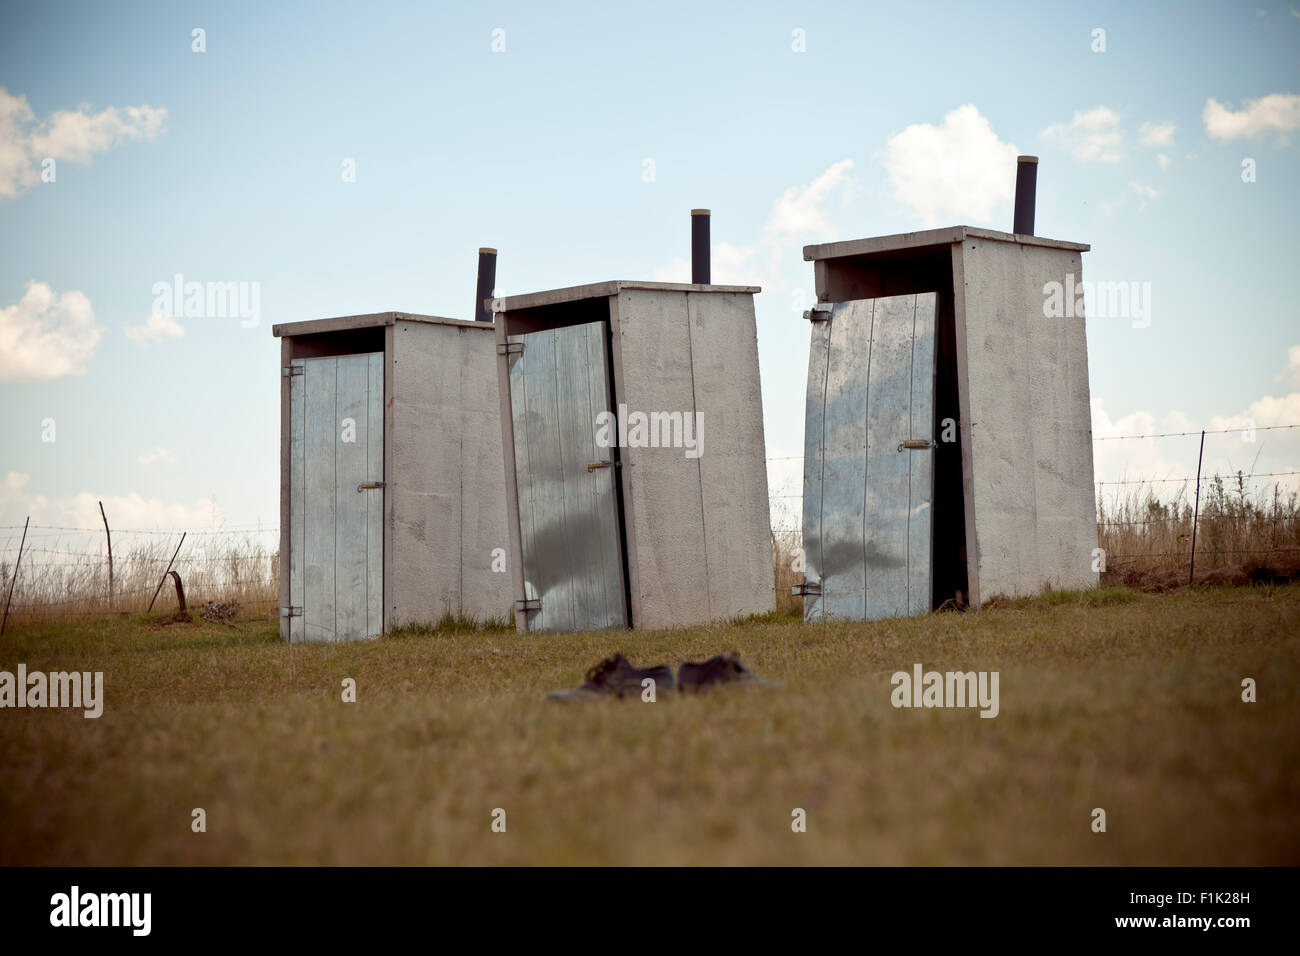 Landscape shot of three outhouse buildings Stock Photo